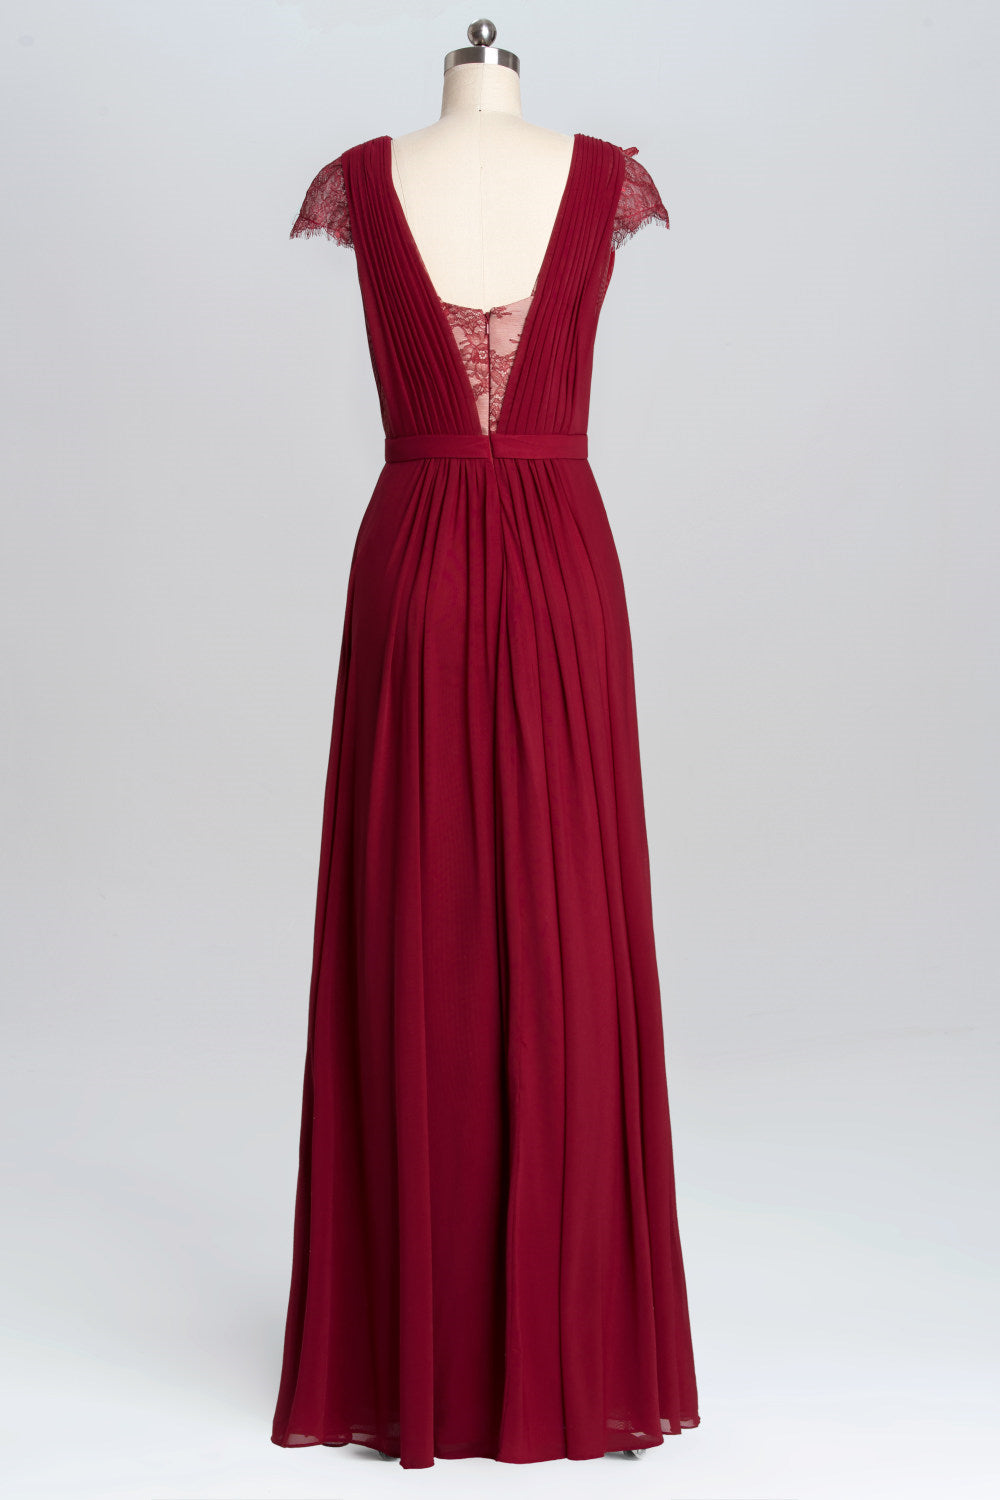 Wine Red A-line Chiffon Long Bridesmaid Dress with Cap Sleeves